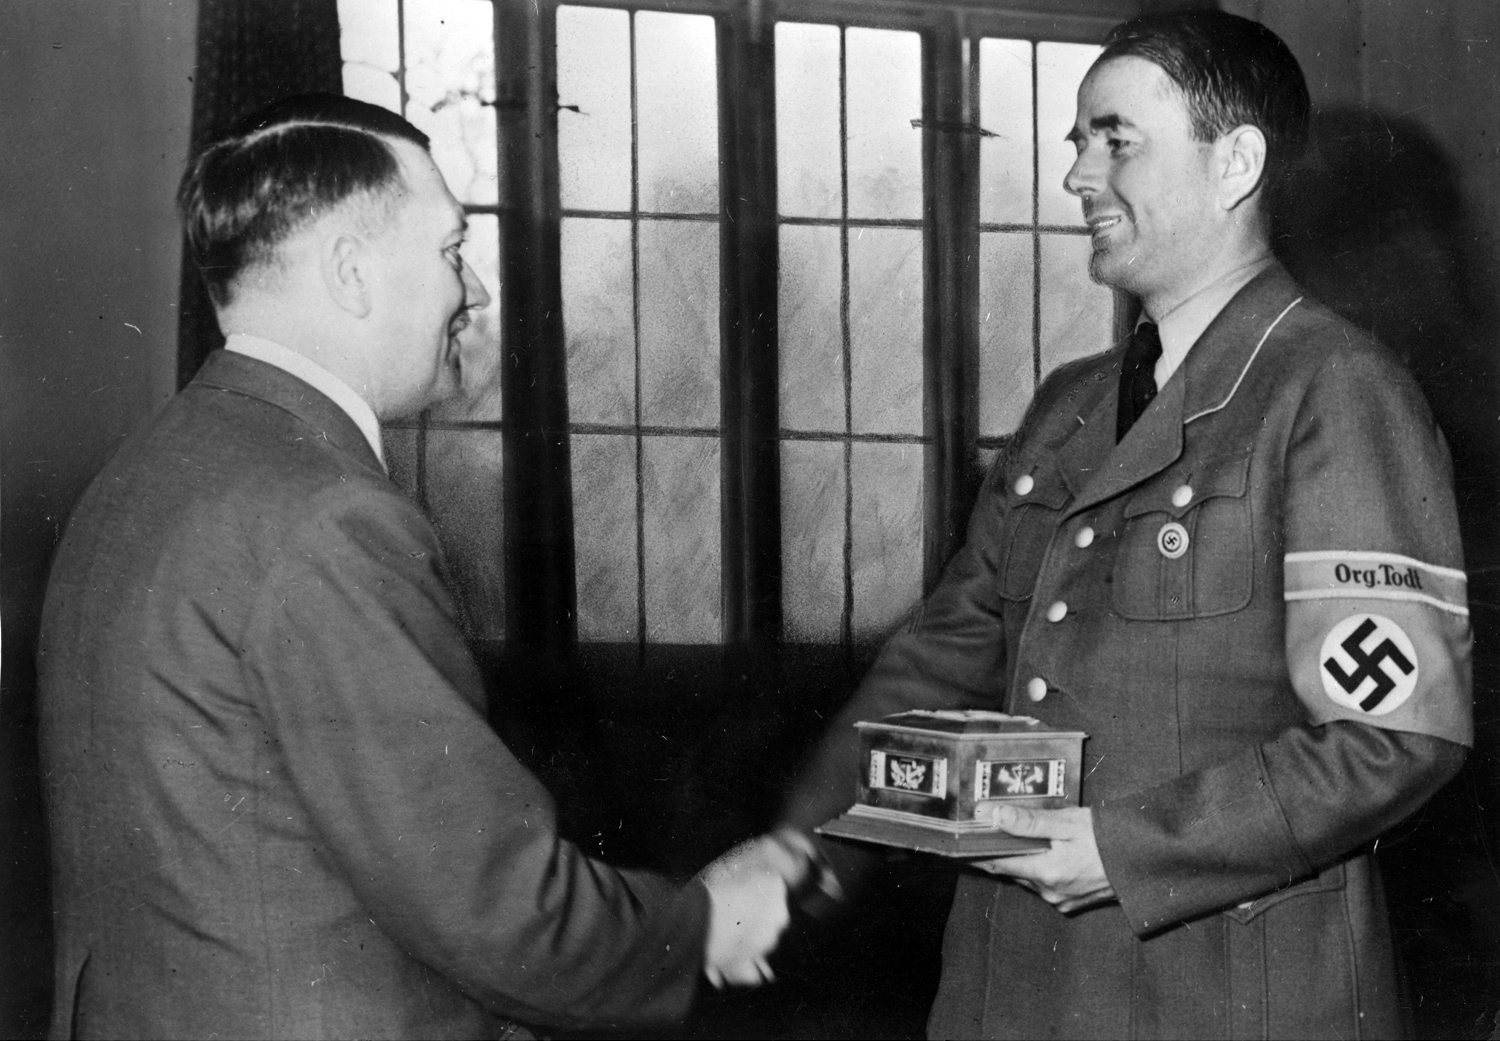 Adolf Hitler presents Speer with the Dr. Todt Ring at the Fuhrerhauptquartier Werewolf